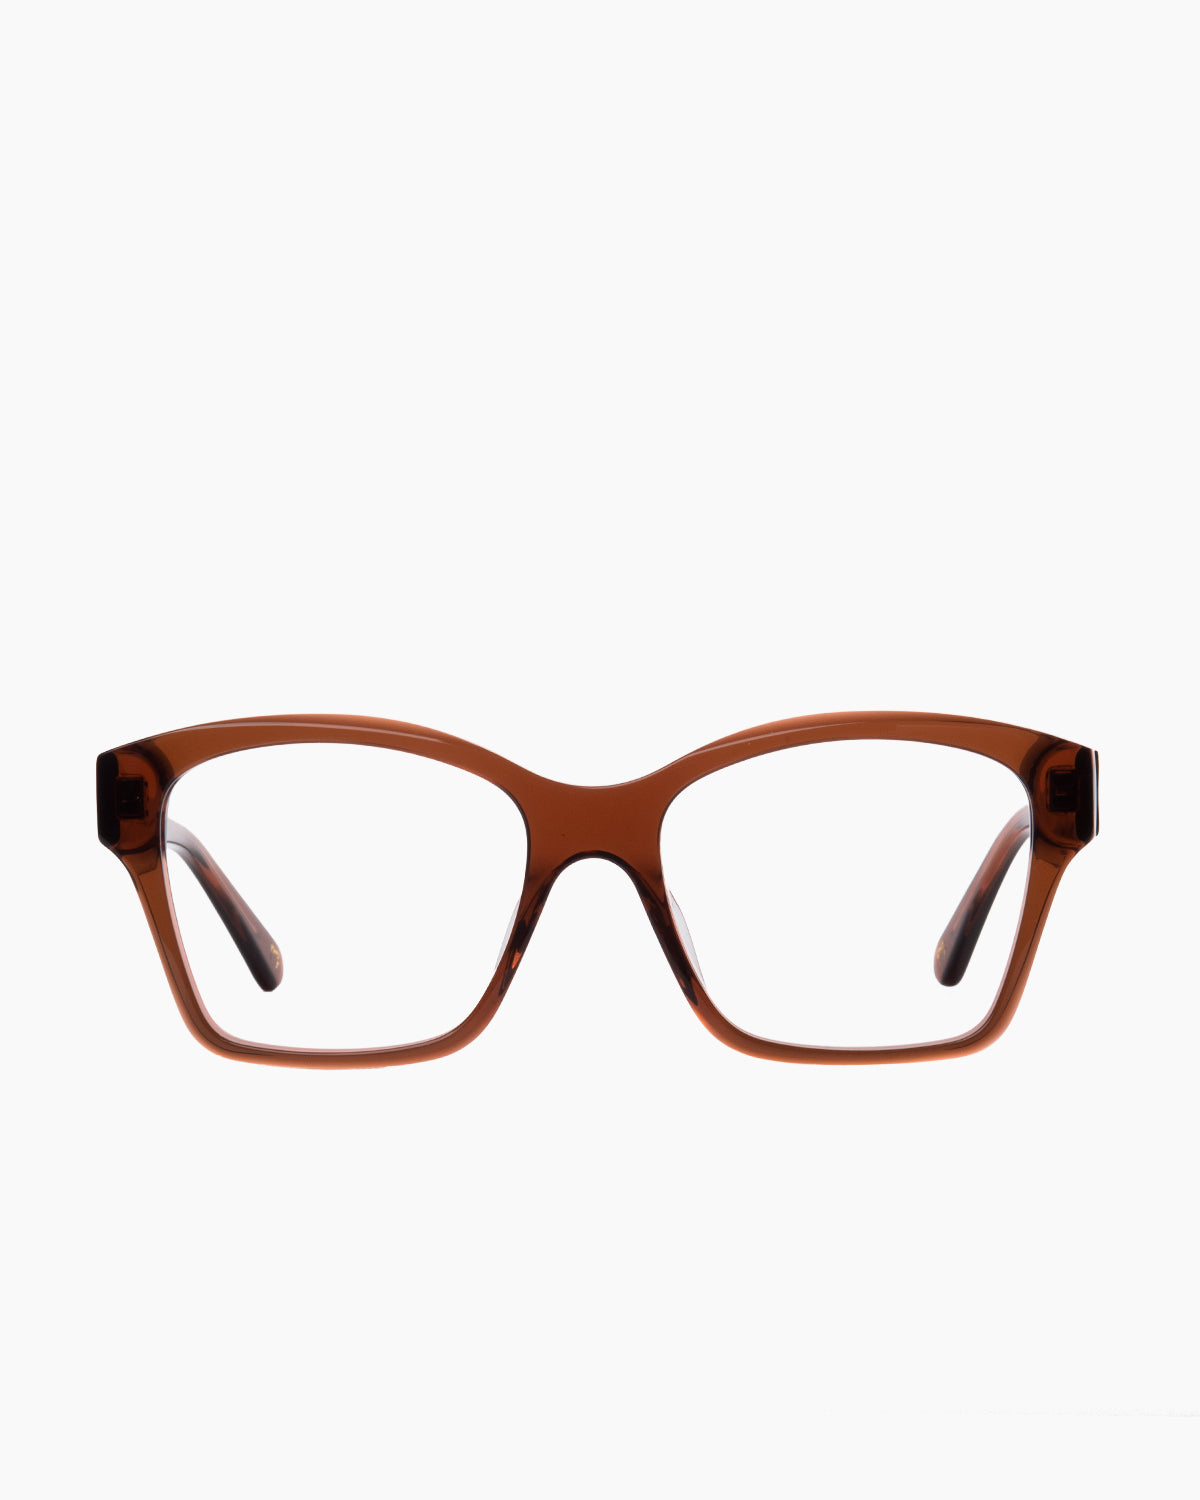 Spectacleeyeworks - Riley - c735 | Bar à lunettes:  Marie-Sophie Dion